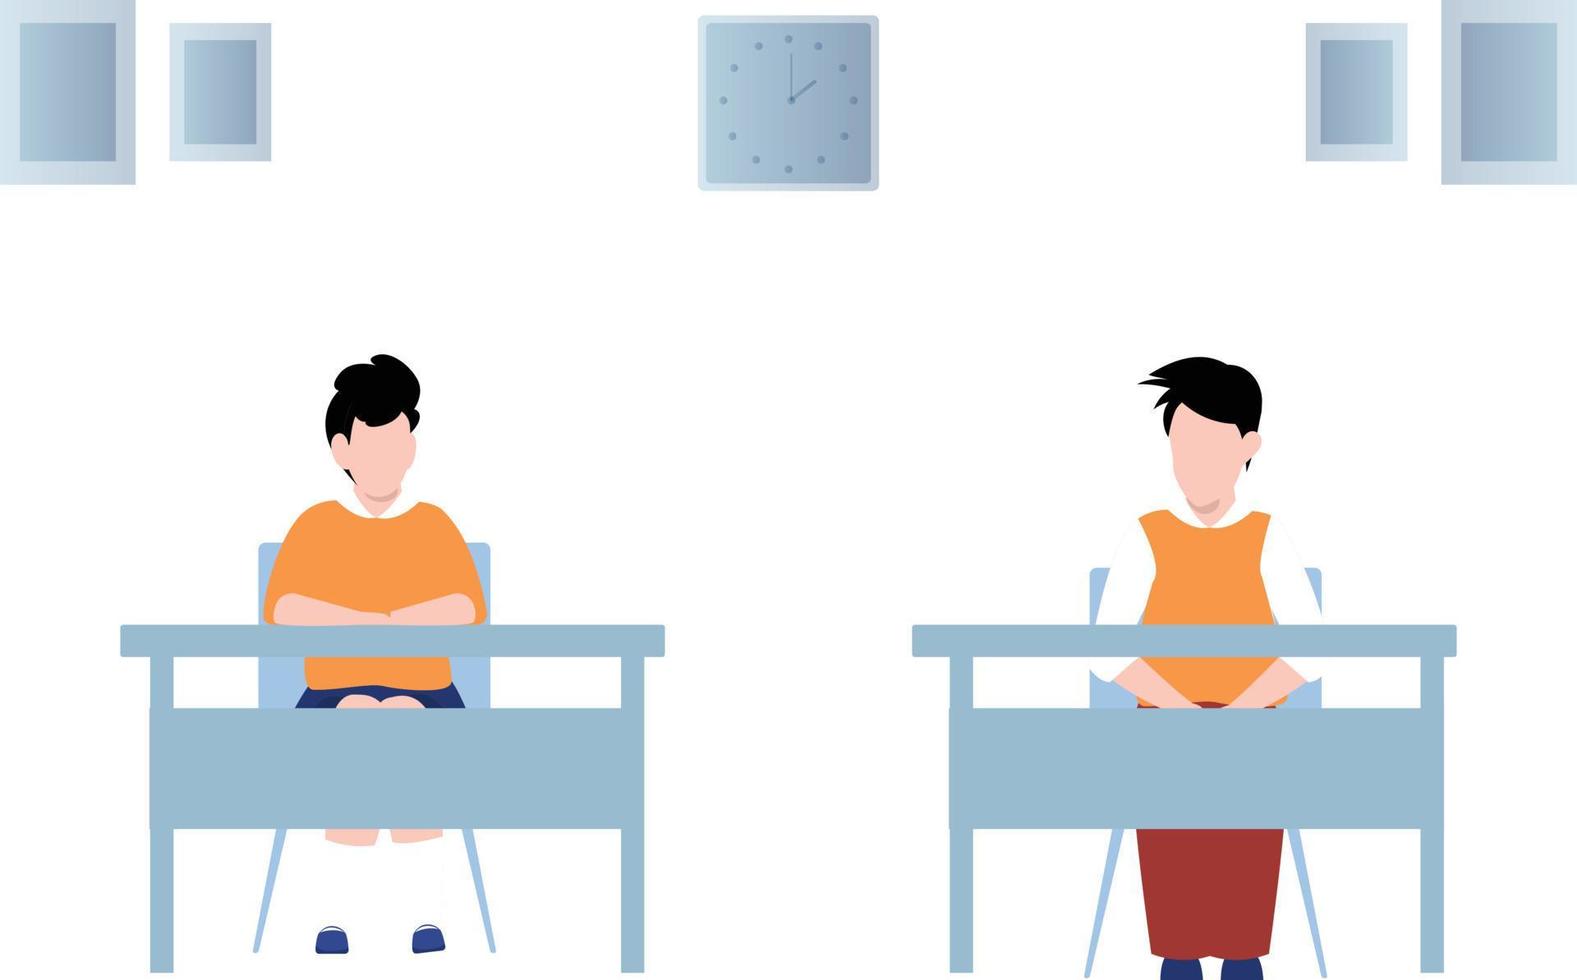 The students are sitting on their desks in classroom. vector